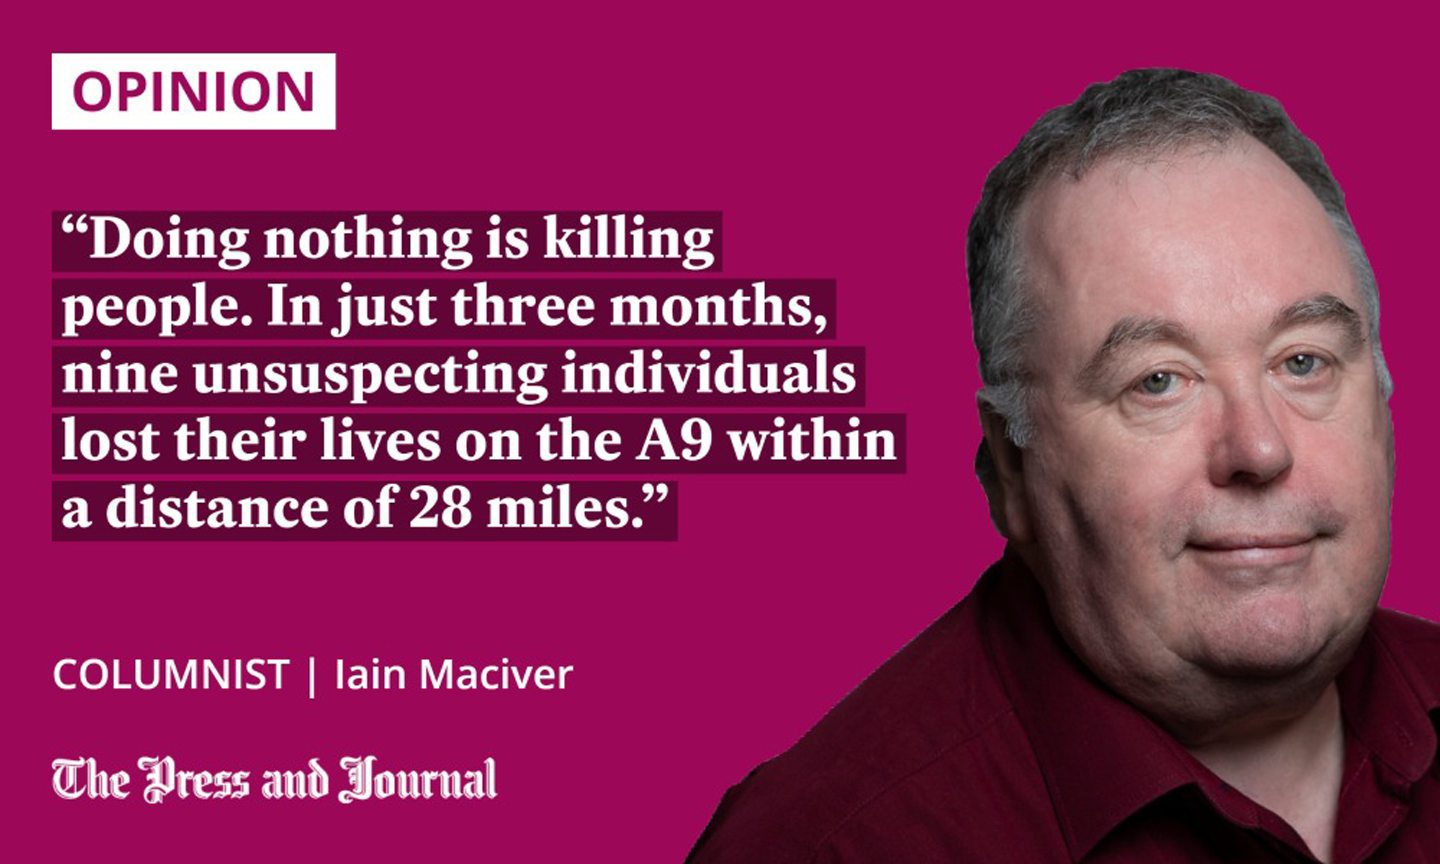 Quotation from columinst Iain Maciver: "Doing nothing is killing people. In just three months, nine unsuspecting individuals lost their lives on the A9 within a distance of 28 miles."